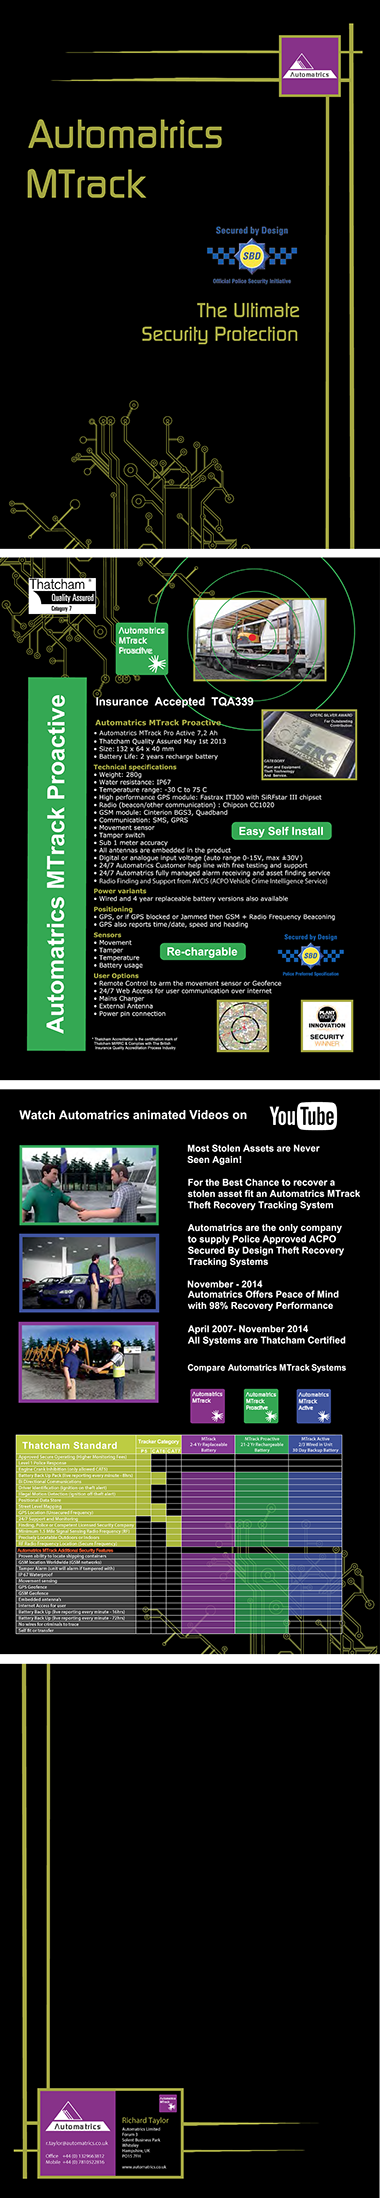 Automatrics MTrack Brochure for the Ultimate Security Protection